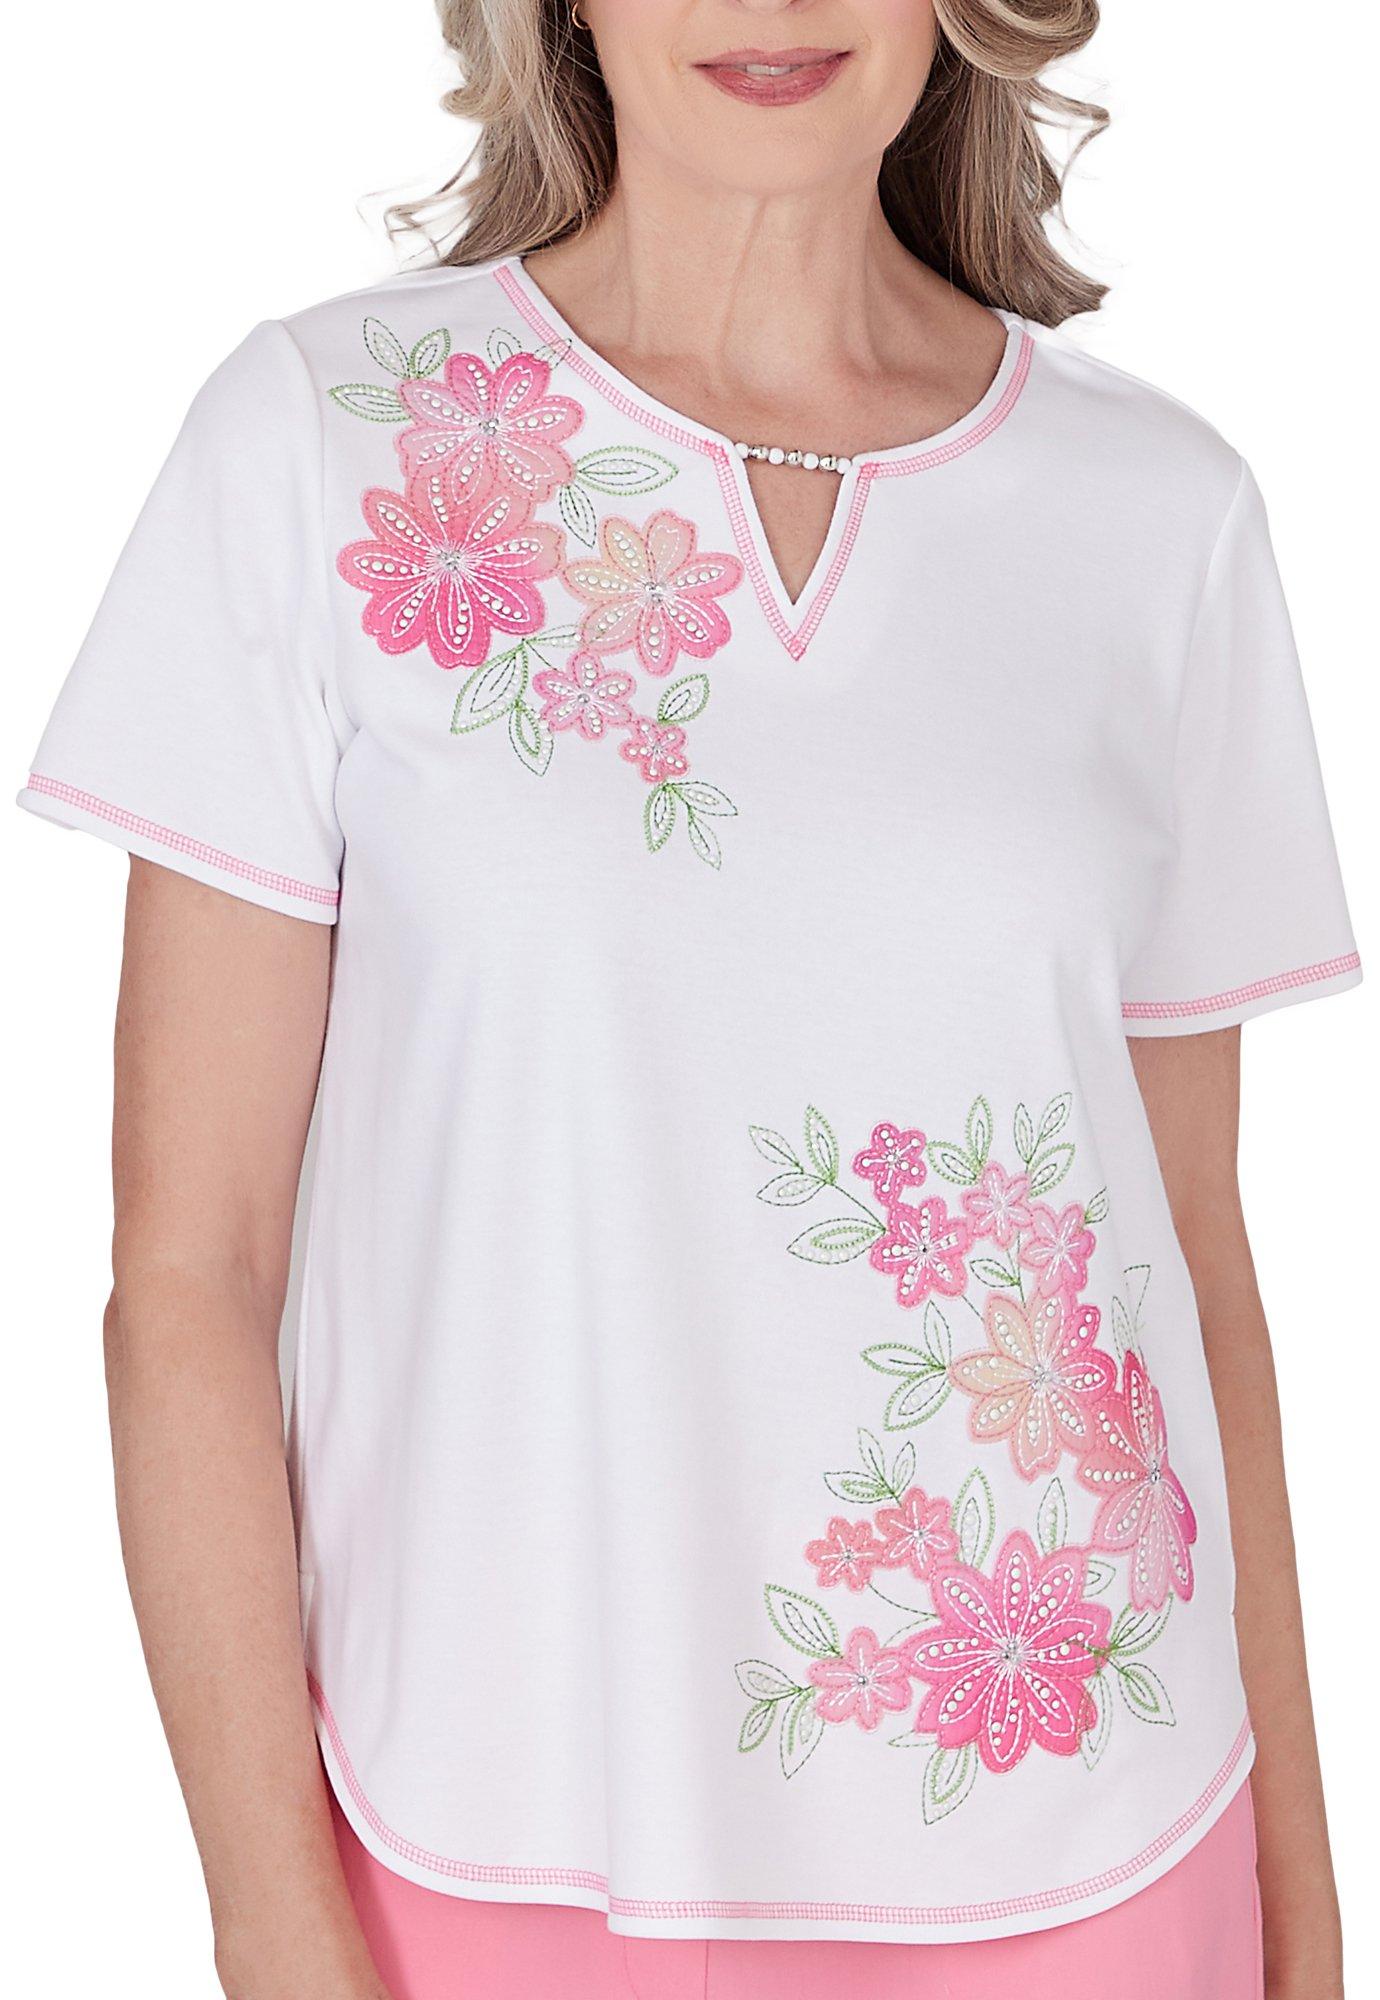 Alfred Dunner Womens Short Sleeve Floral Applique Top